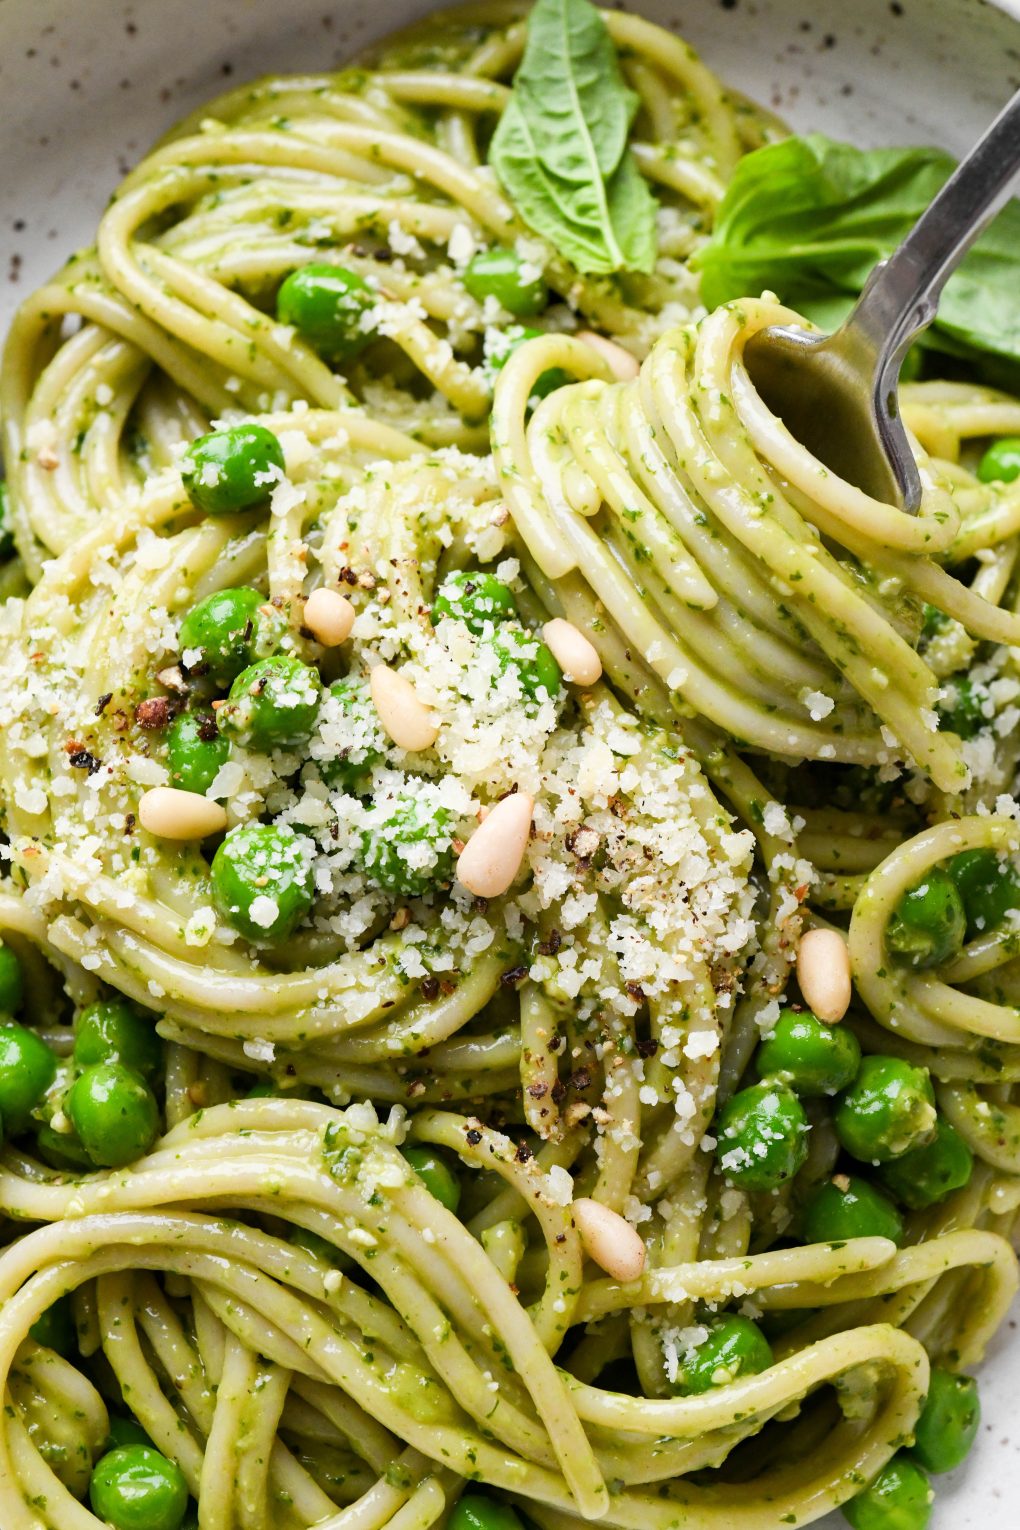 Pesto pasta made with spaghetti in a speckled ceramic bowl with a fork twirling a bite, topped with pine nuts and grated parmesan.